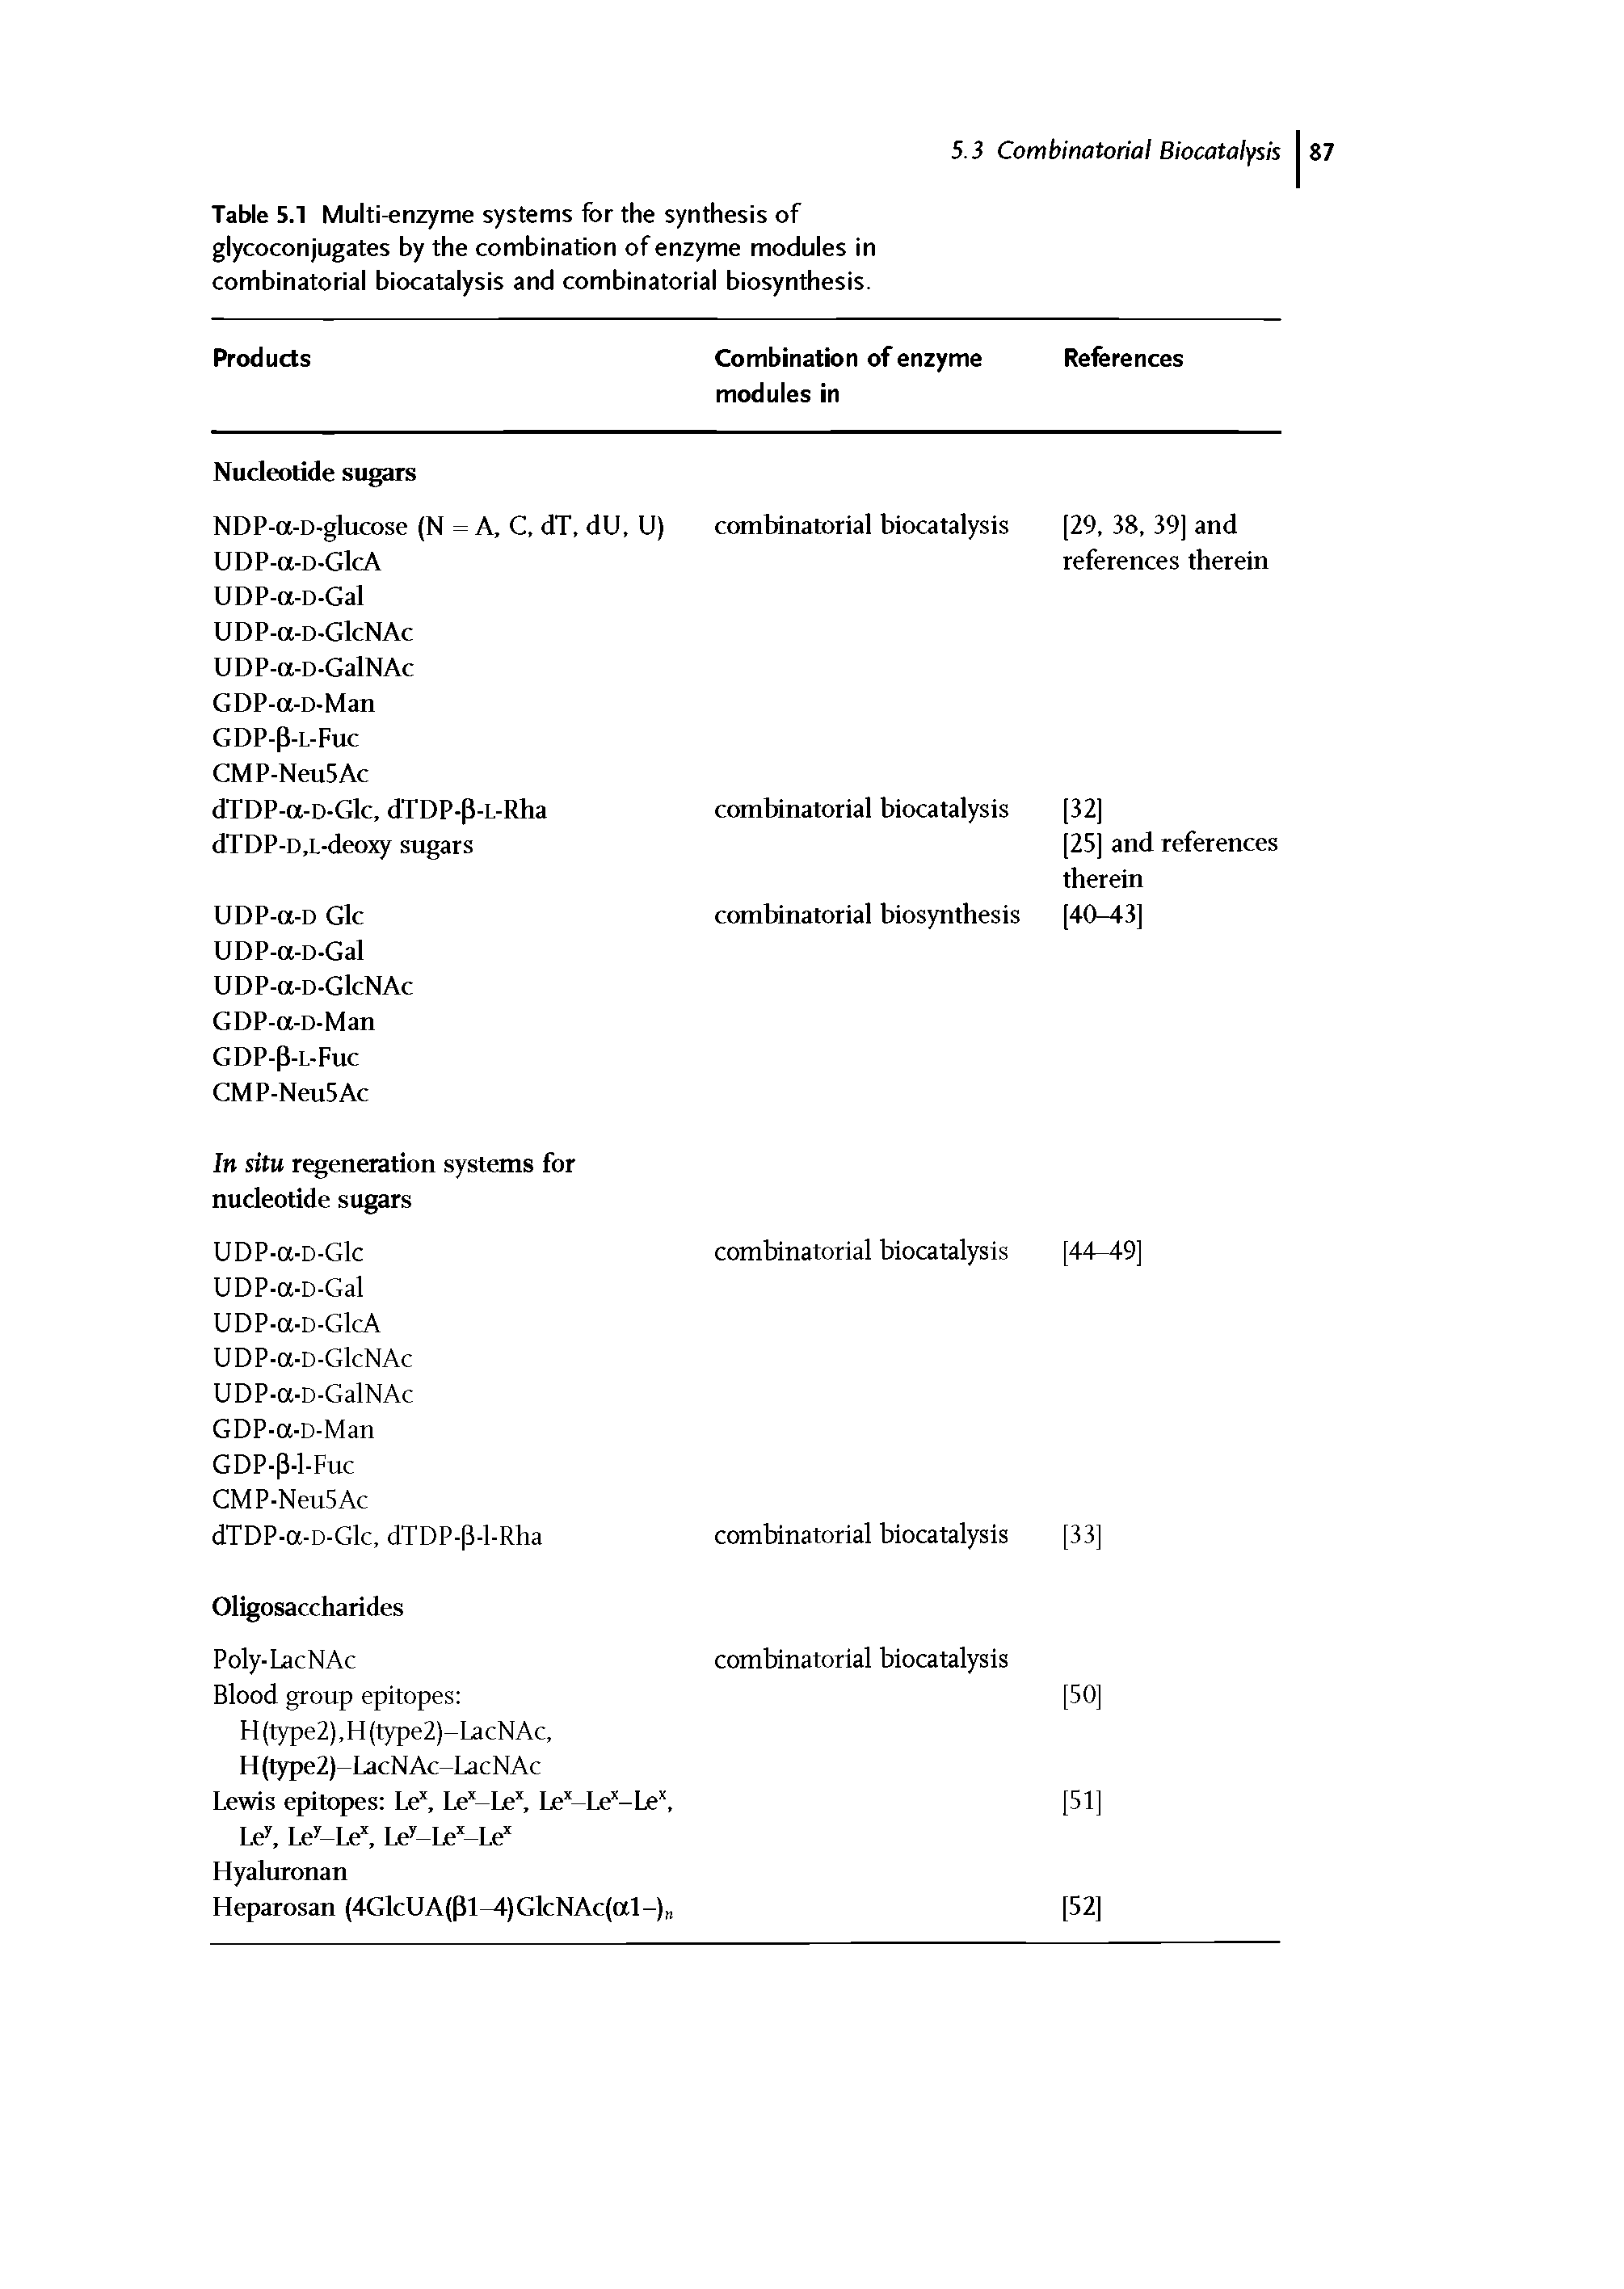 Table 5.1 Multi-enzyme systems for the synthesis of glycoconjugates by the combination of enzyme modules in combinatorial biocatalysis and combinatorial biosynthesis.